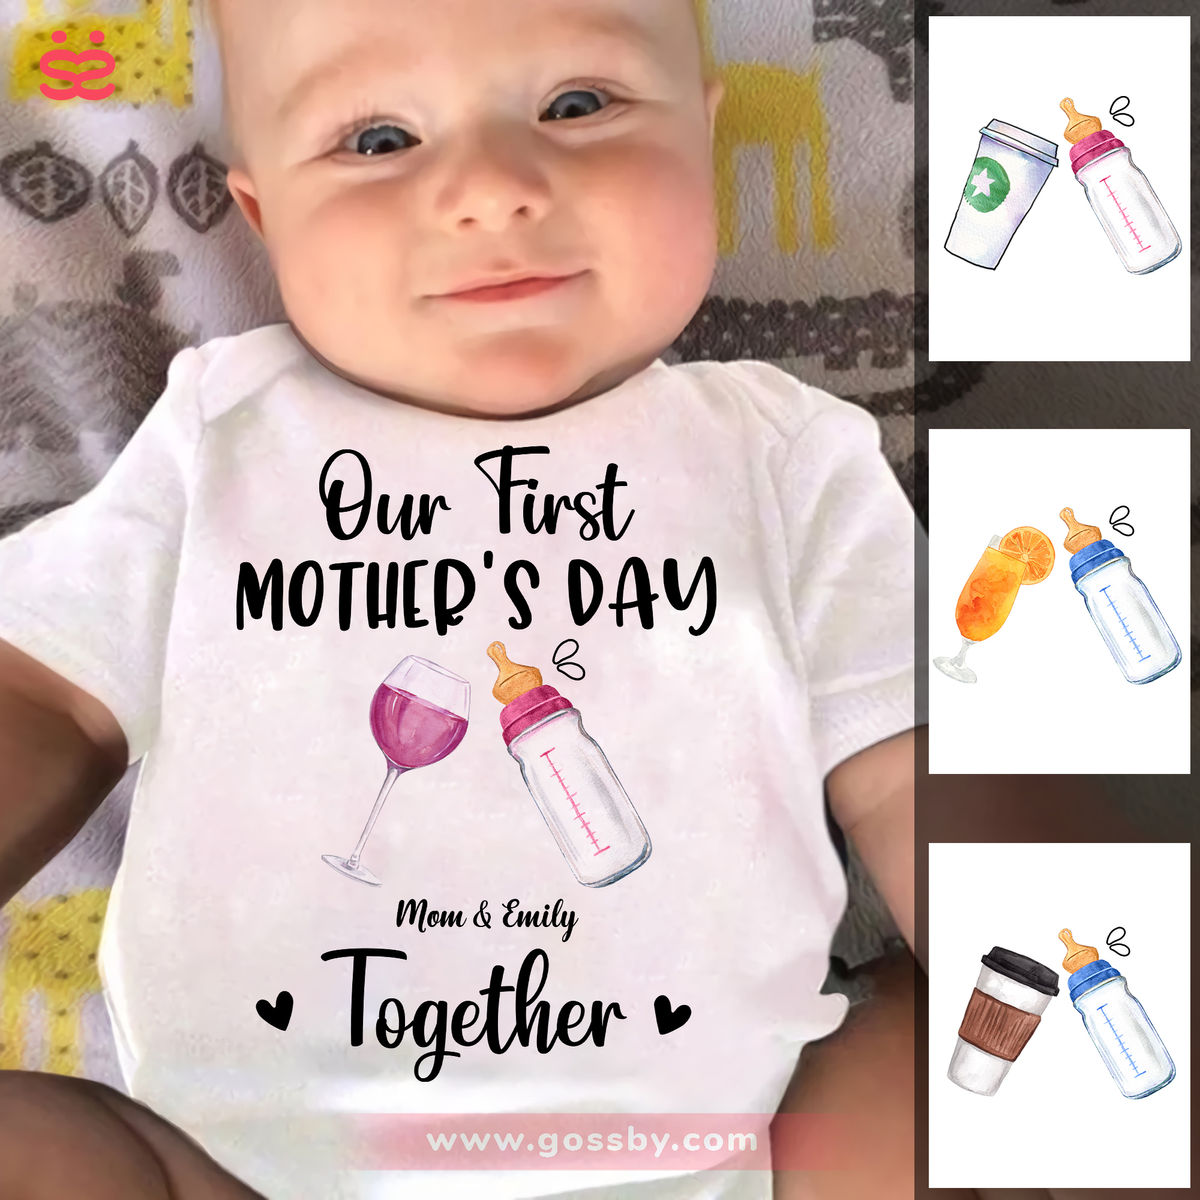 Gift for Mom From Son, First Mother's Day Gift, Personalized New